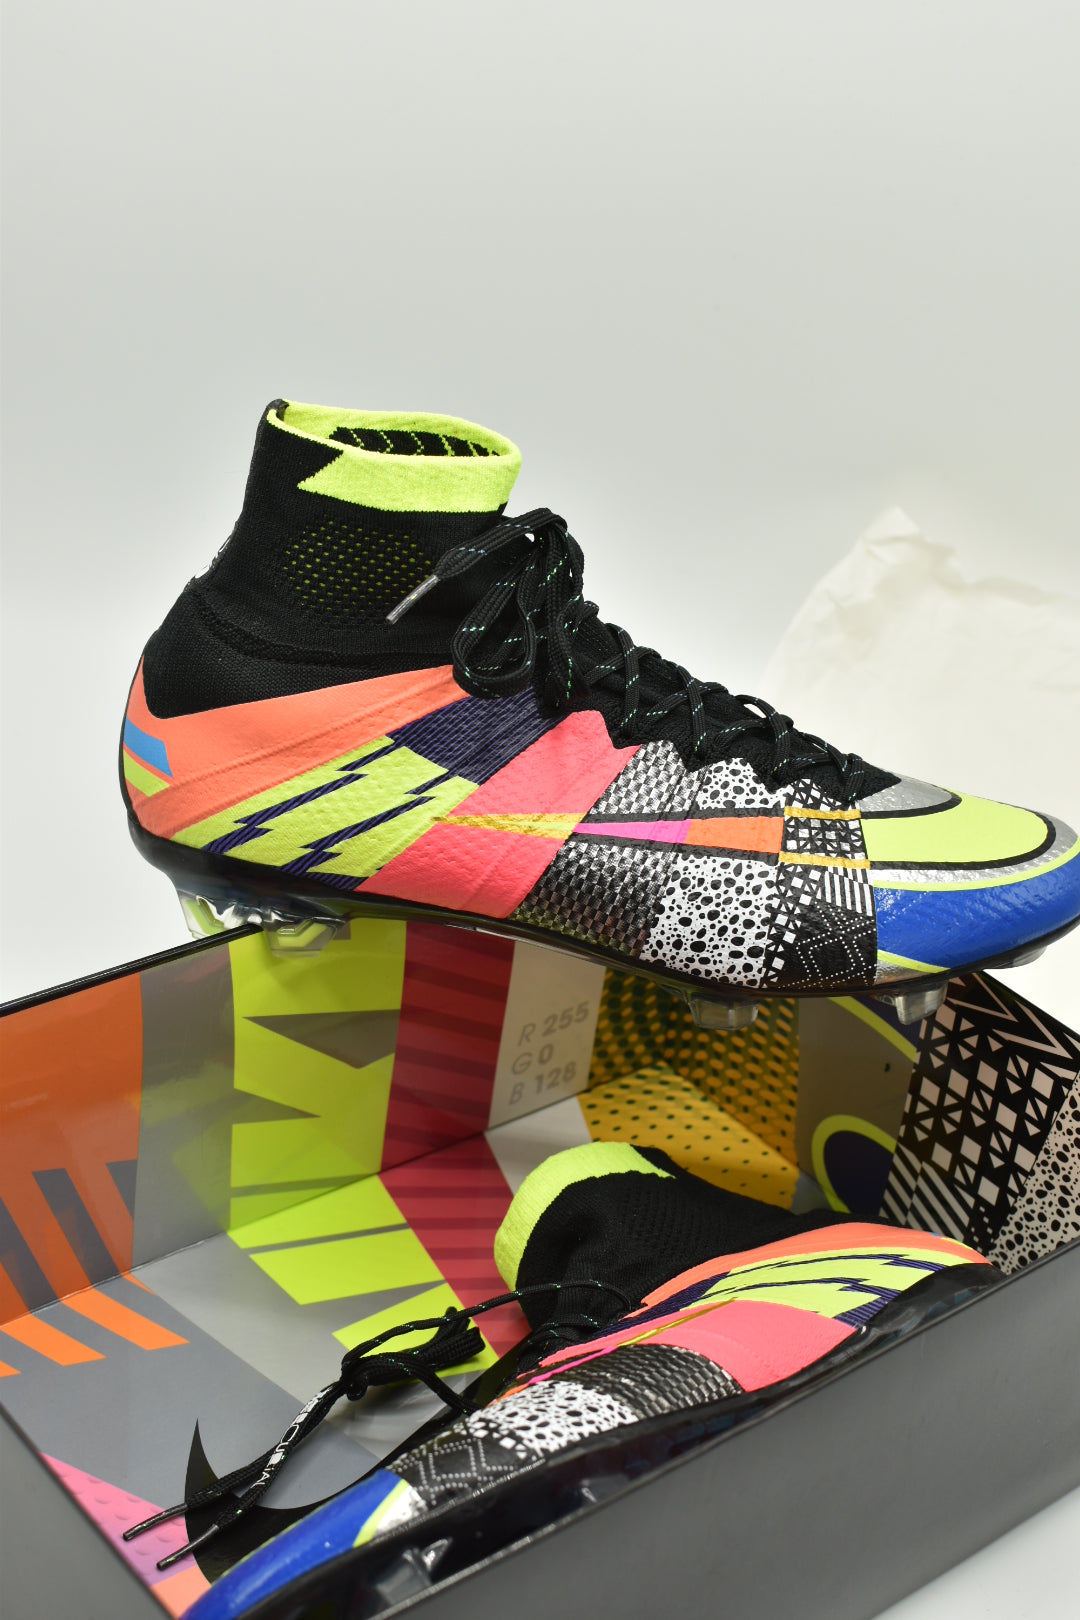 NIKE MERCURIAL SUPERFLY IV 'WHAT THE MERCURIAL' FG 835363-007 Dutch Boot Collector (DBC)